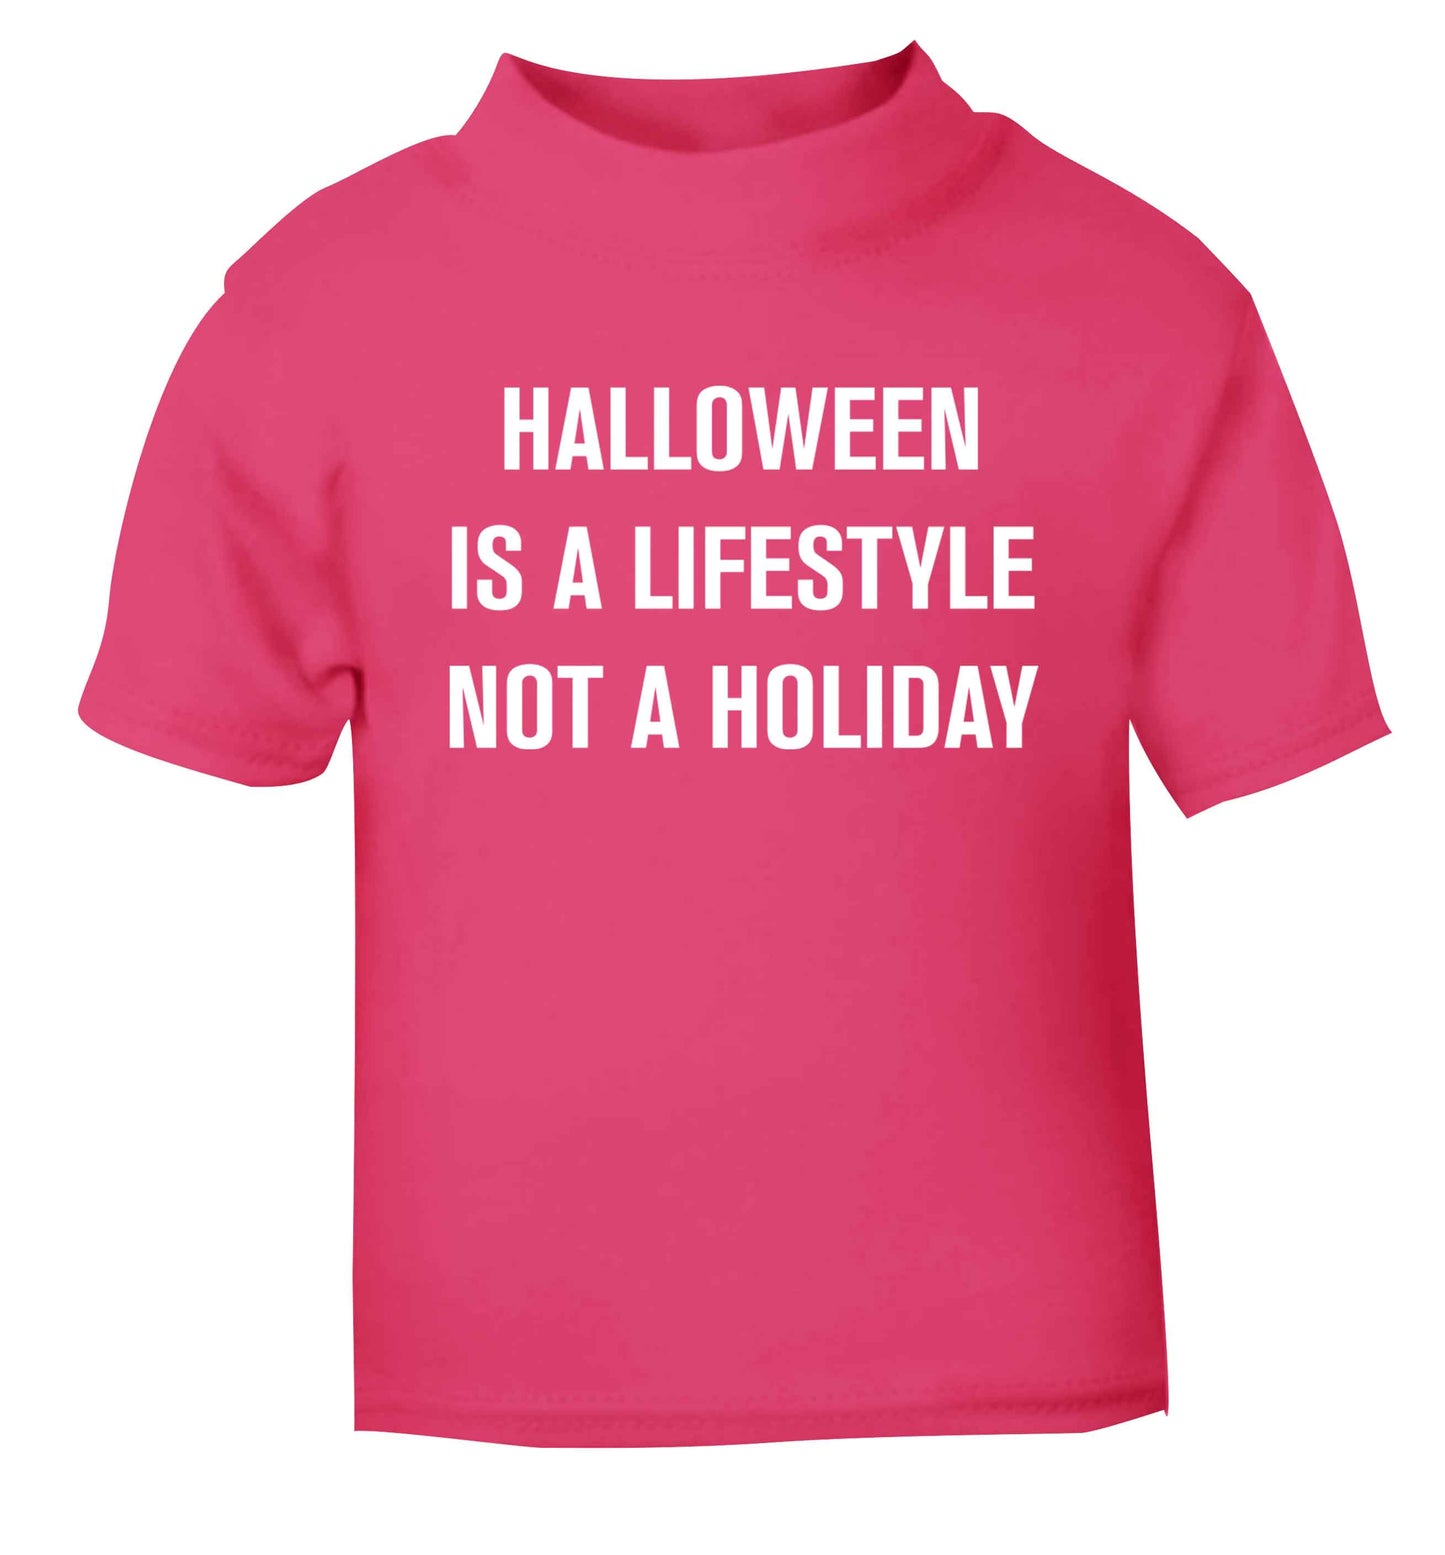 Halloween is a lifestyle not a holiday pink baby toddler Tshirt 2 Years